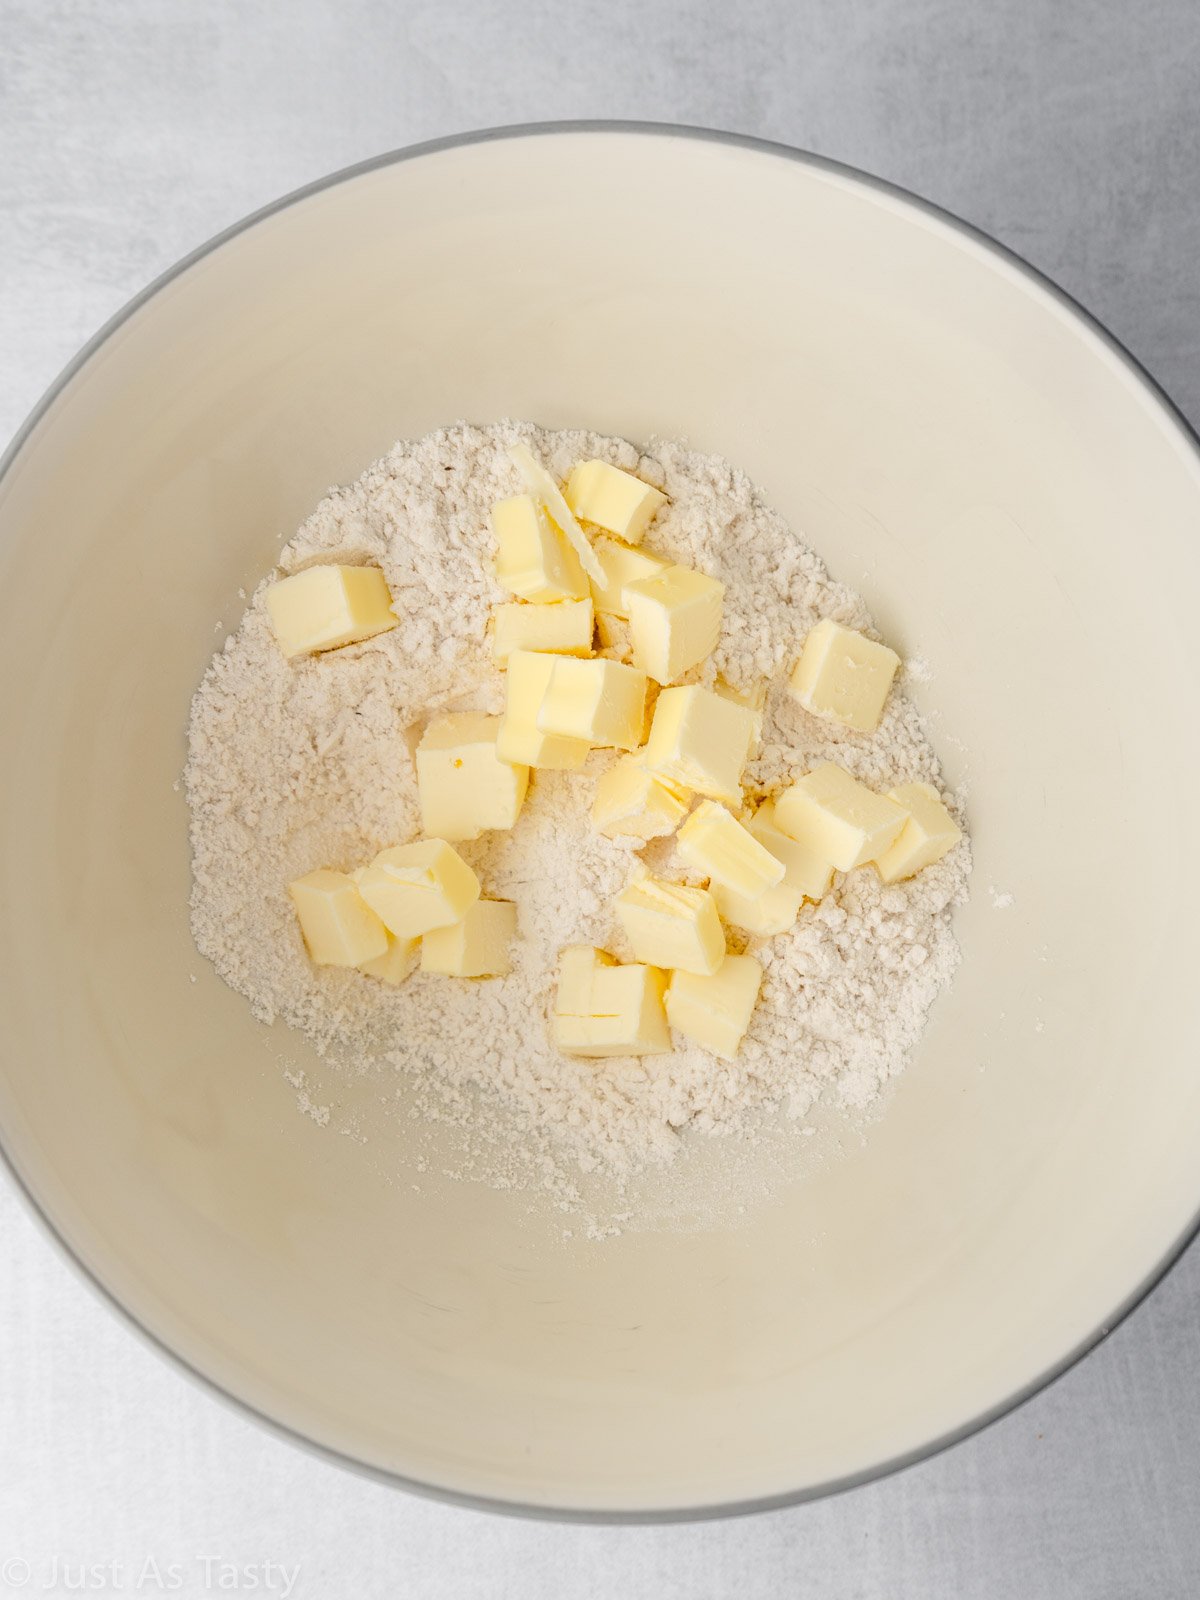 Cubes of butter and flour in a mixing bowl.